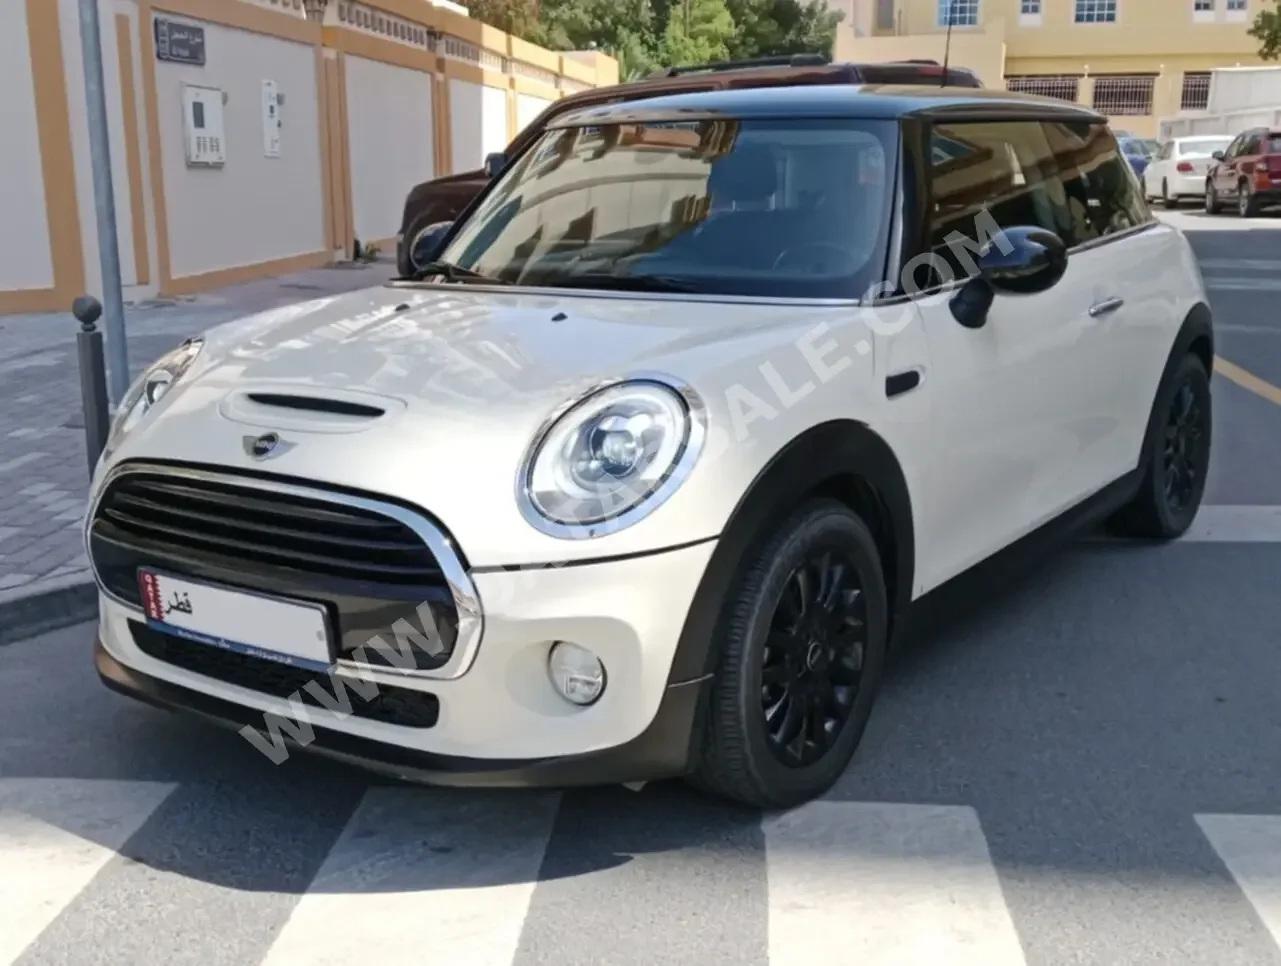 Mini  Cooper  2018  Automatic  97,000 Km  3 Cylinder  Front Wheel Drive (FWD)  Hatchback  White